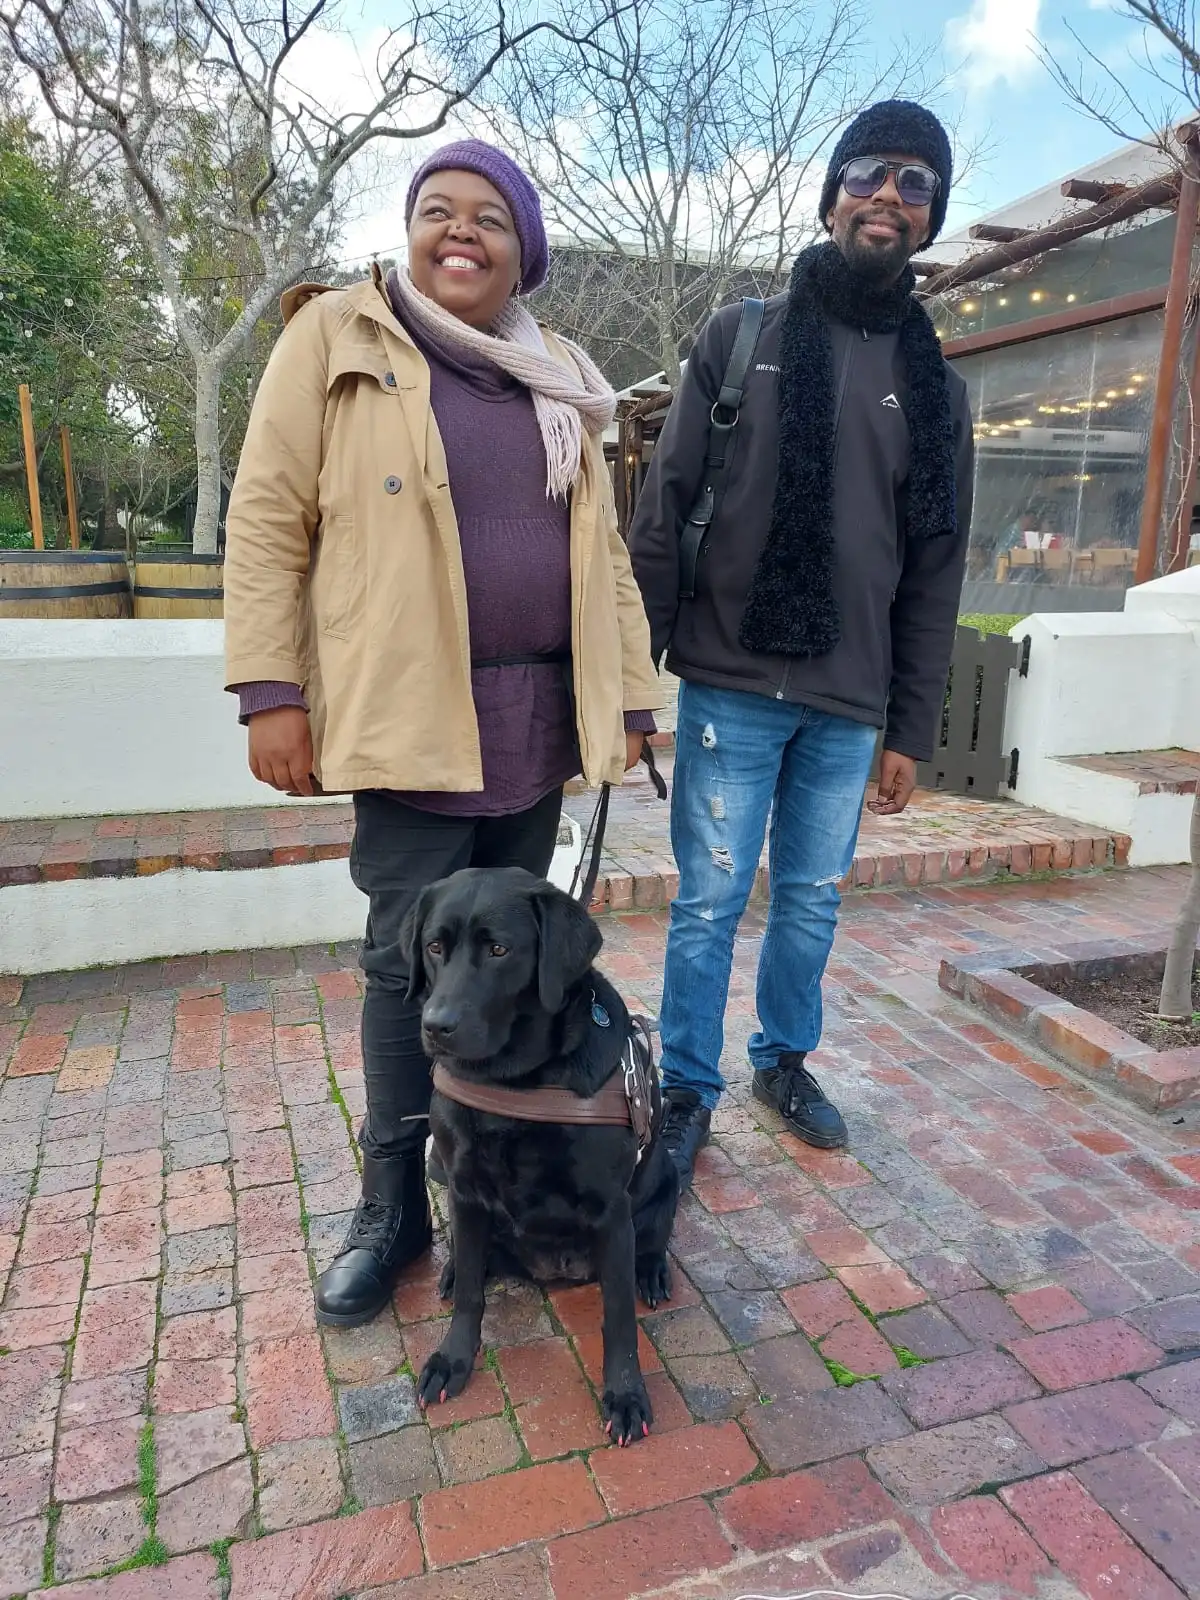 ‘Chatty’ Winston Fani dreams of becoming the first blind tour guide in South Africa